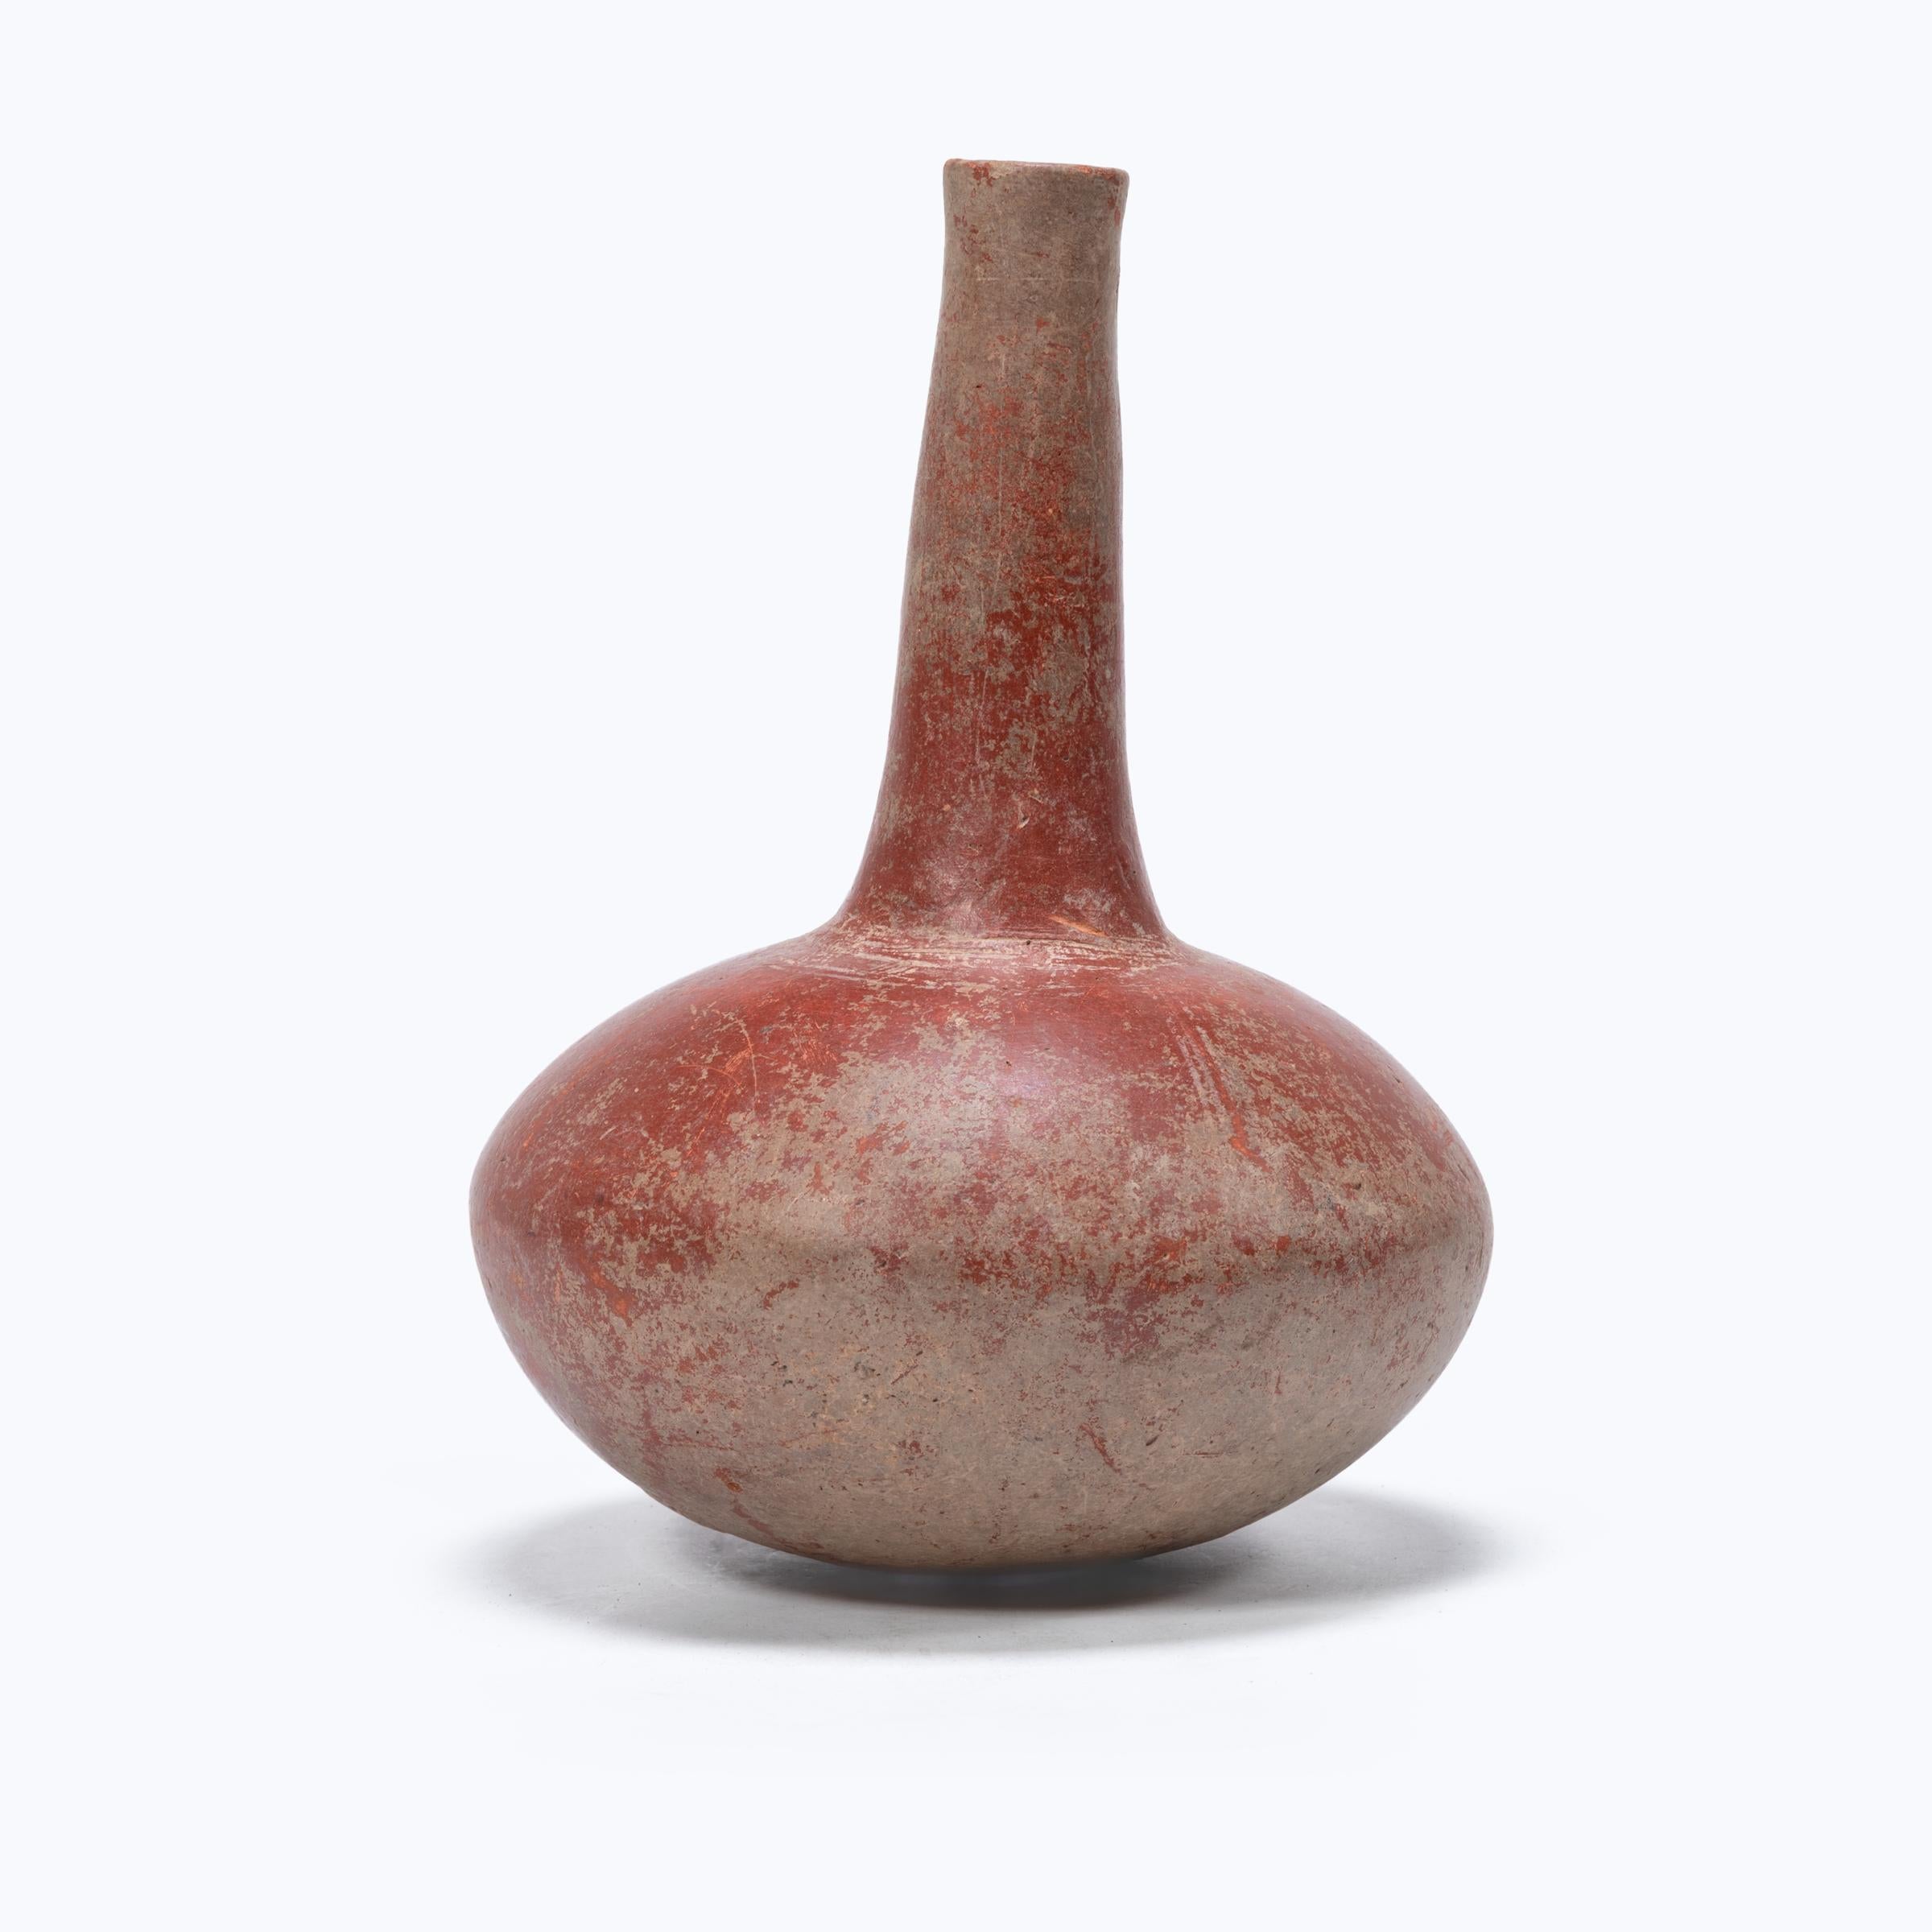 Covered in a beautifully worn red clay slip, this hand-formed African vessel has a dramatic silhouette of a squat, ovoid body and a long, narrow neck. Subtly etched crosshatch patterns encircle the base of the vase's long neck, and vertical lines